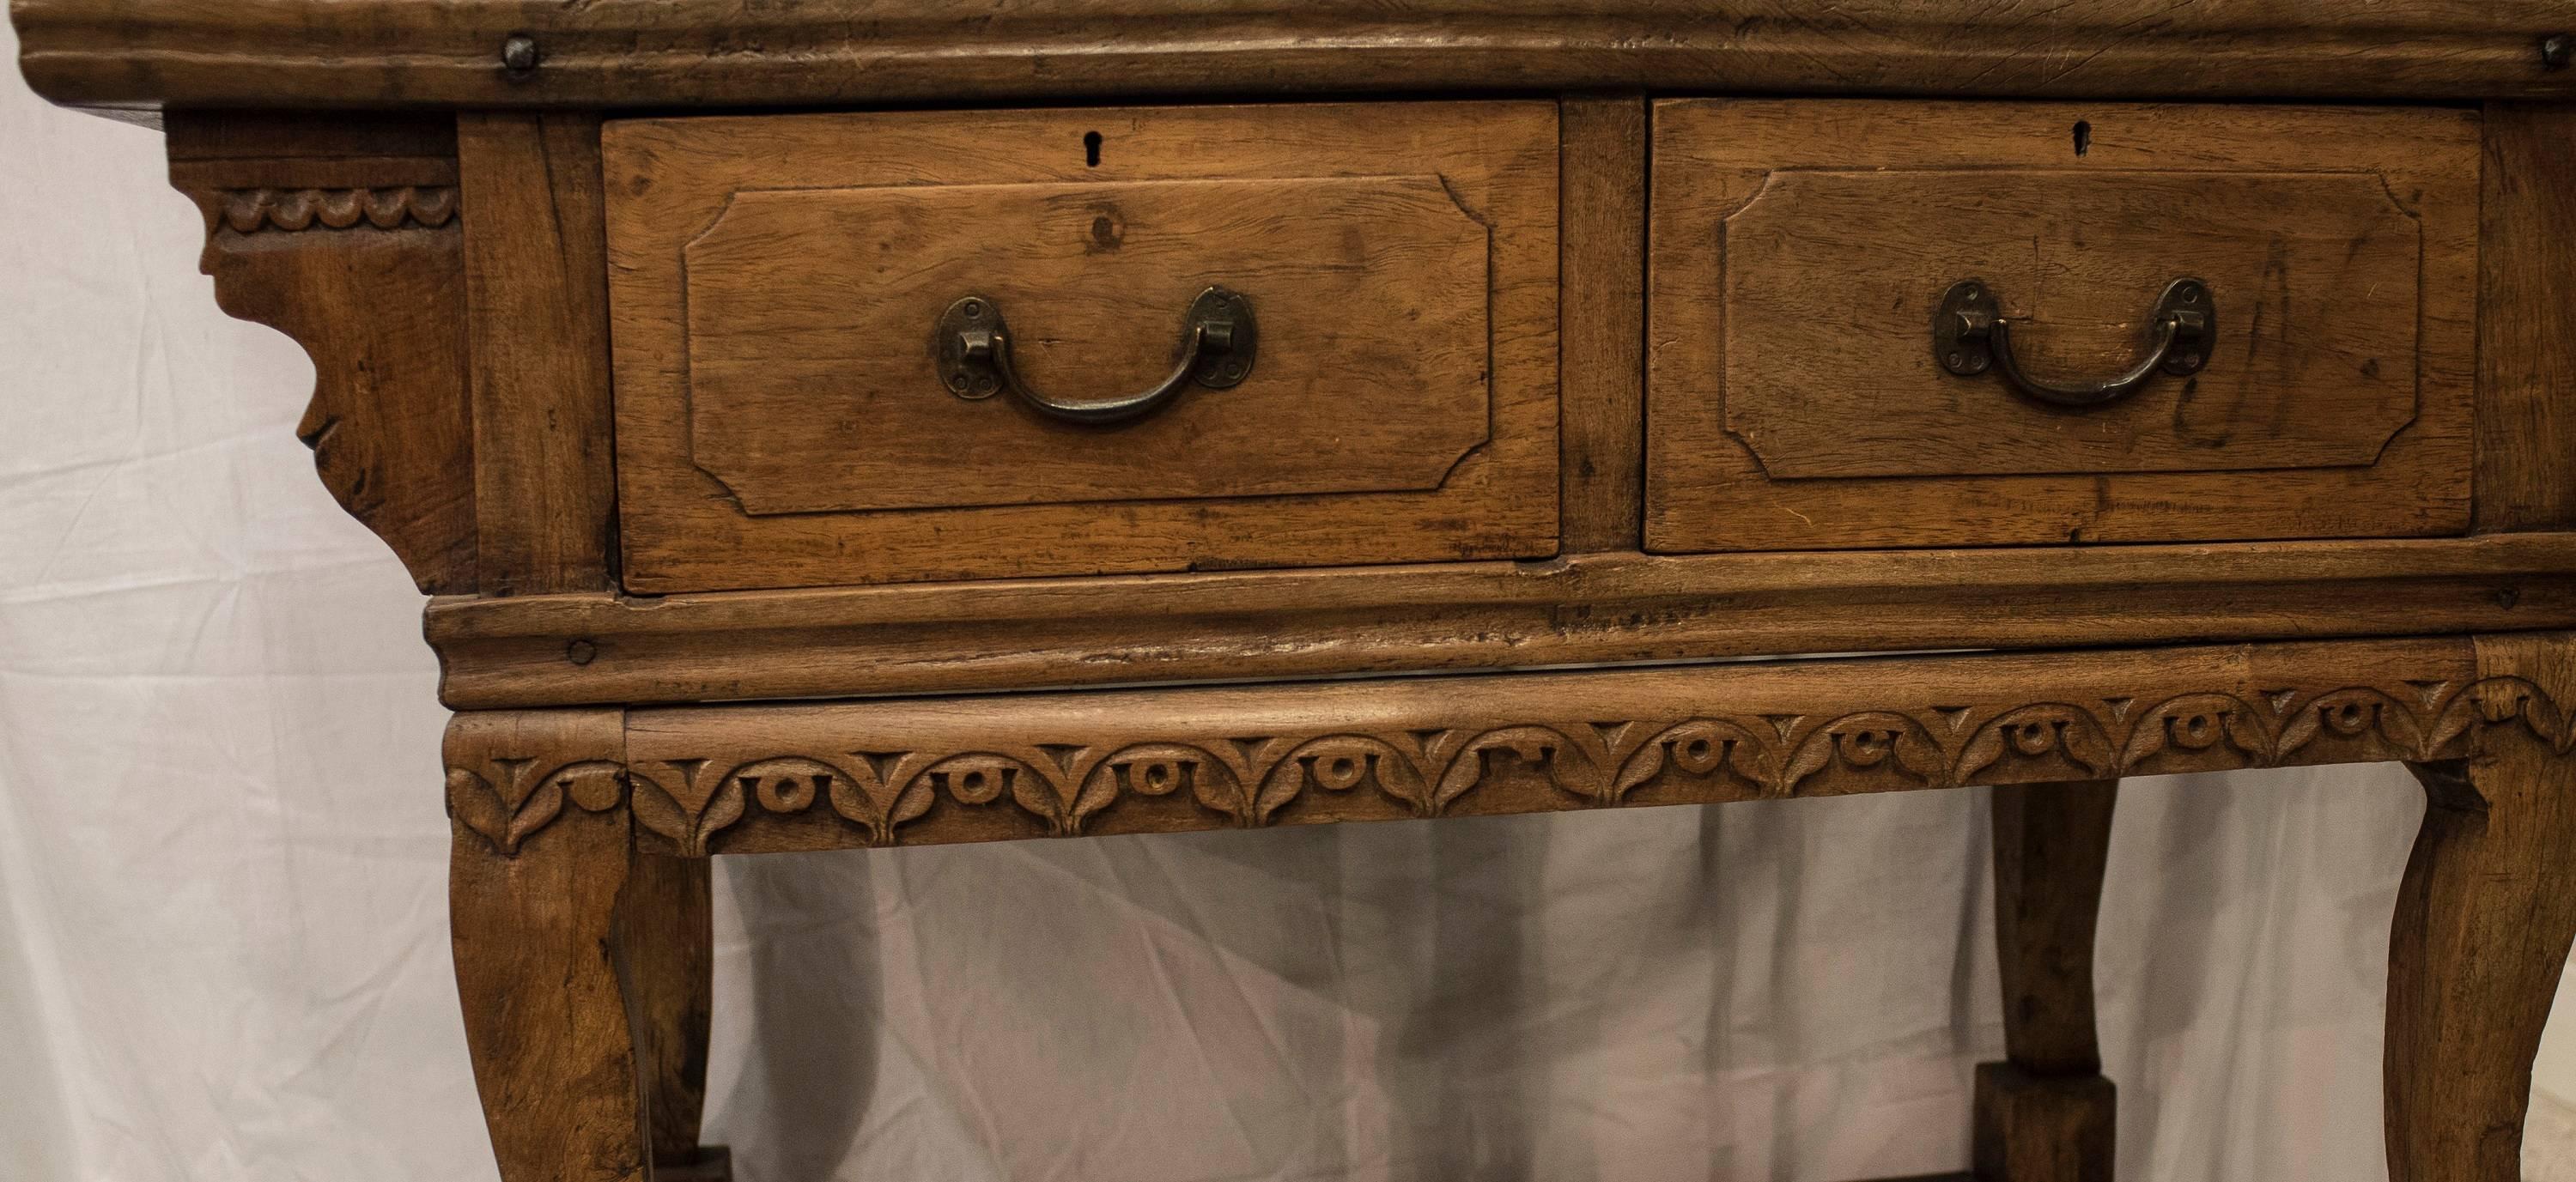 An excepcionel 18th century Chinese carved elm wood console with two drawers in the front. It comes from a private collection in New York. In a very good condition with age and use. Original Shooters